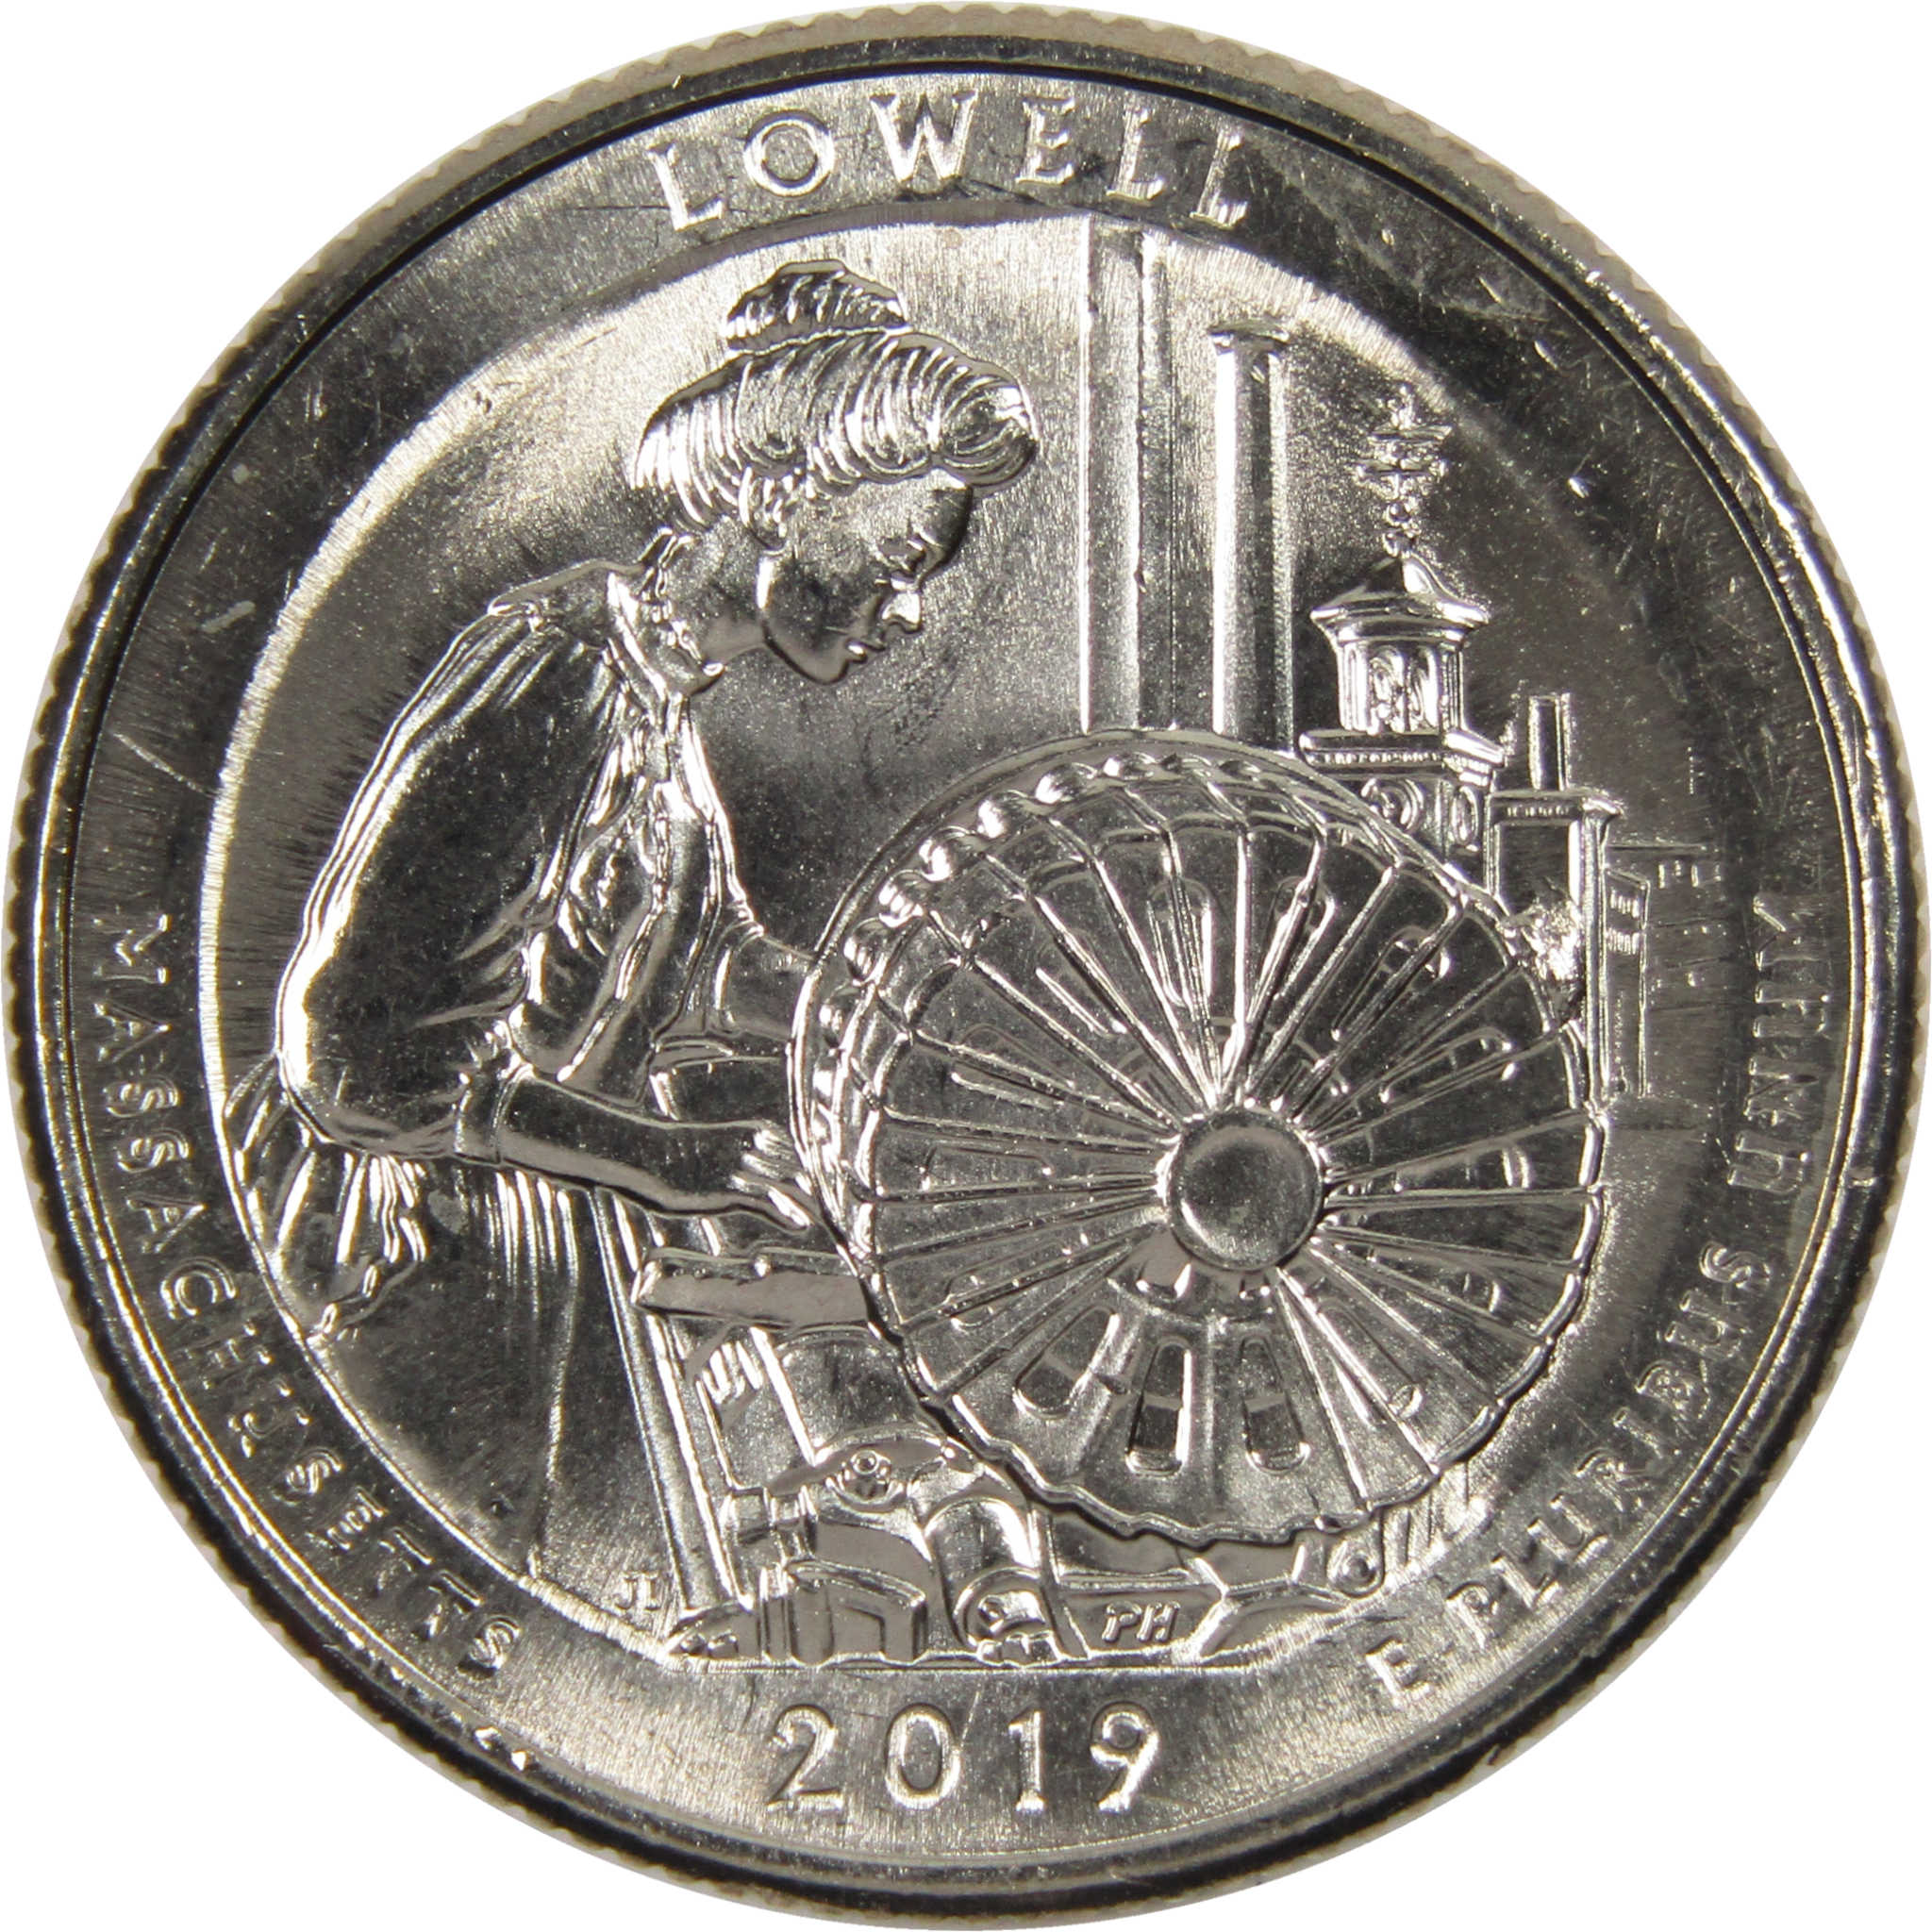 2019 P Lowell NHP National Park Quarter BU Uncirculated Clad 25c Coin